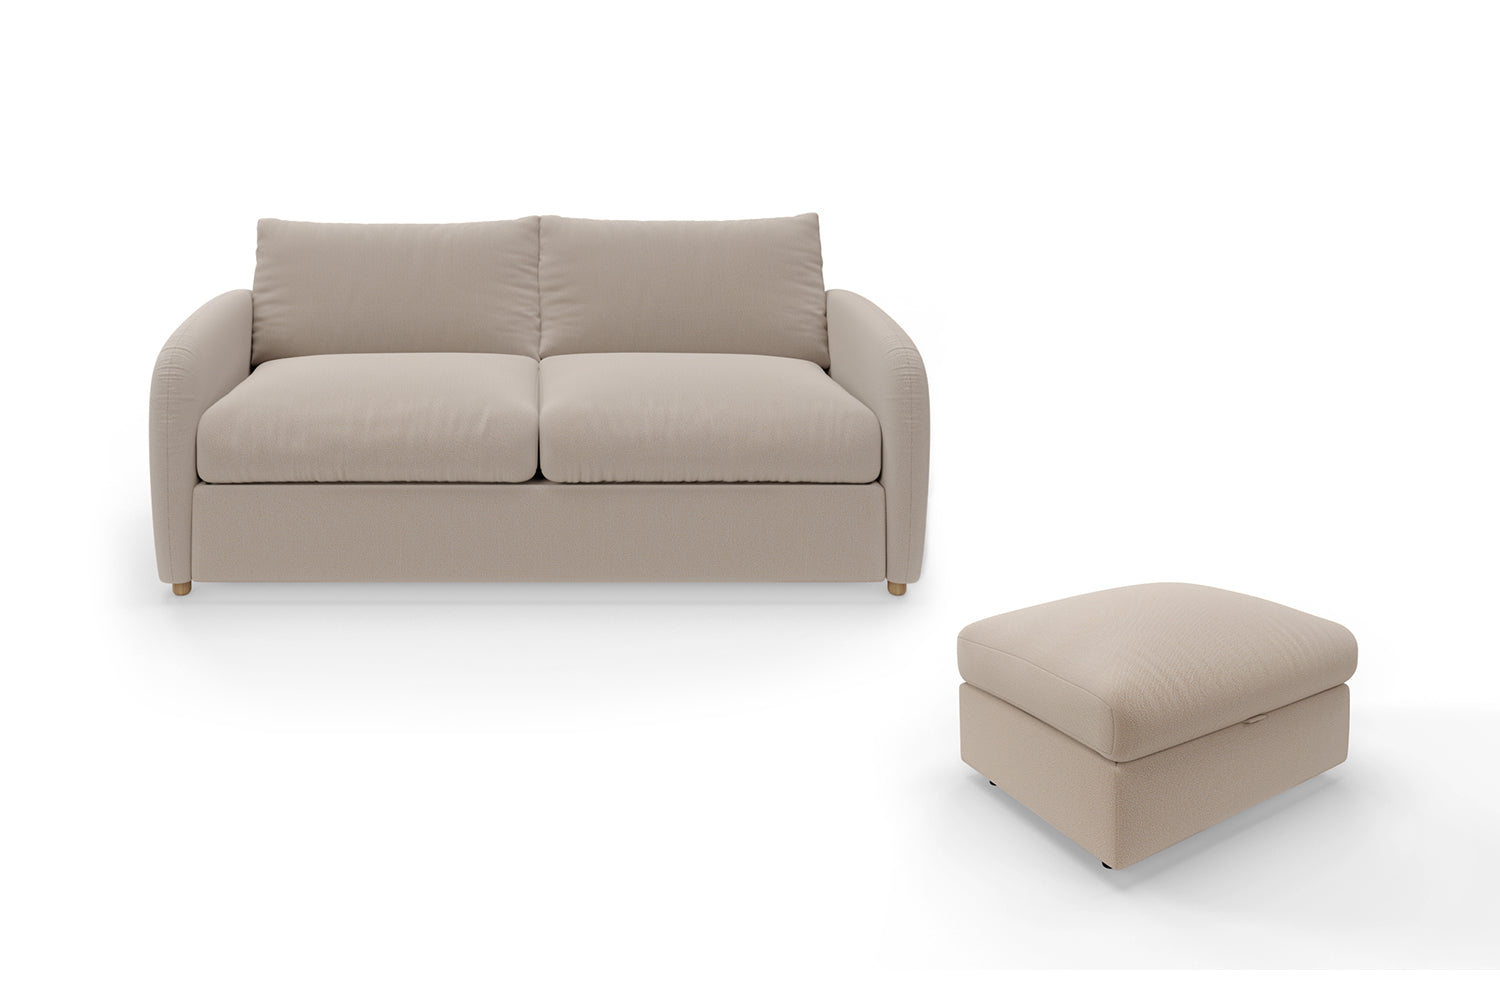 The Small Biggie - 3 Seater Sofa and Footstool Set - Oatmeal